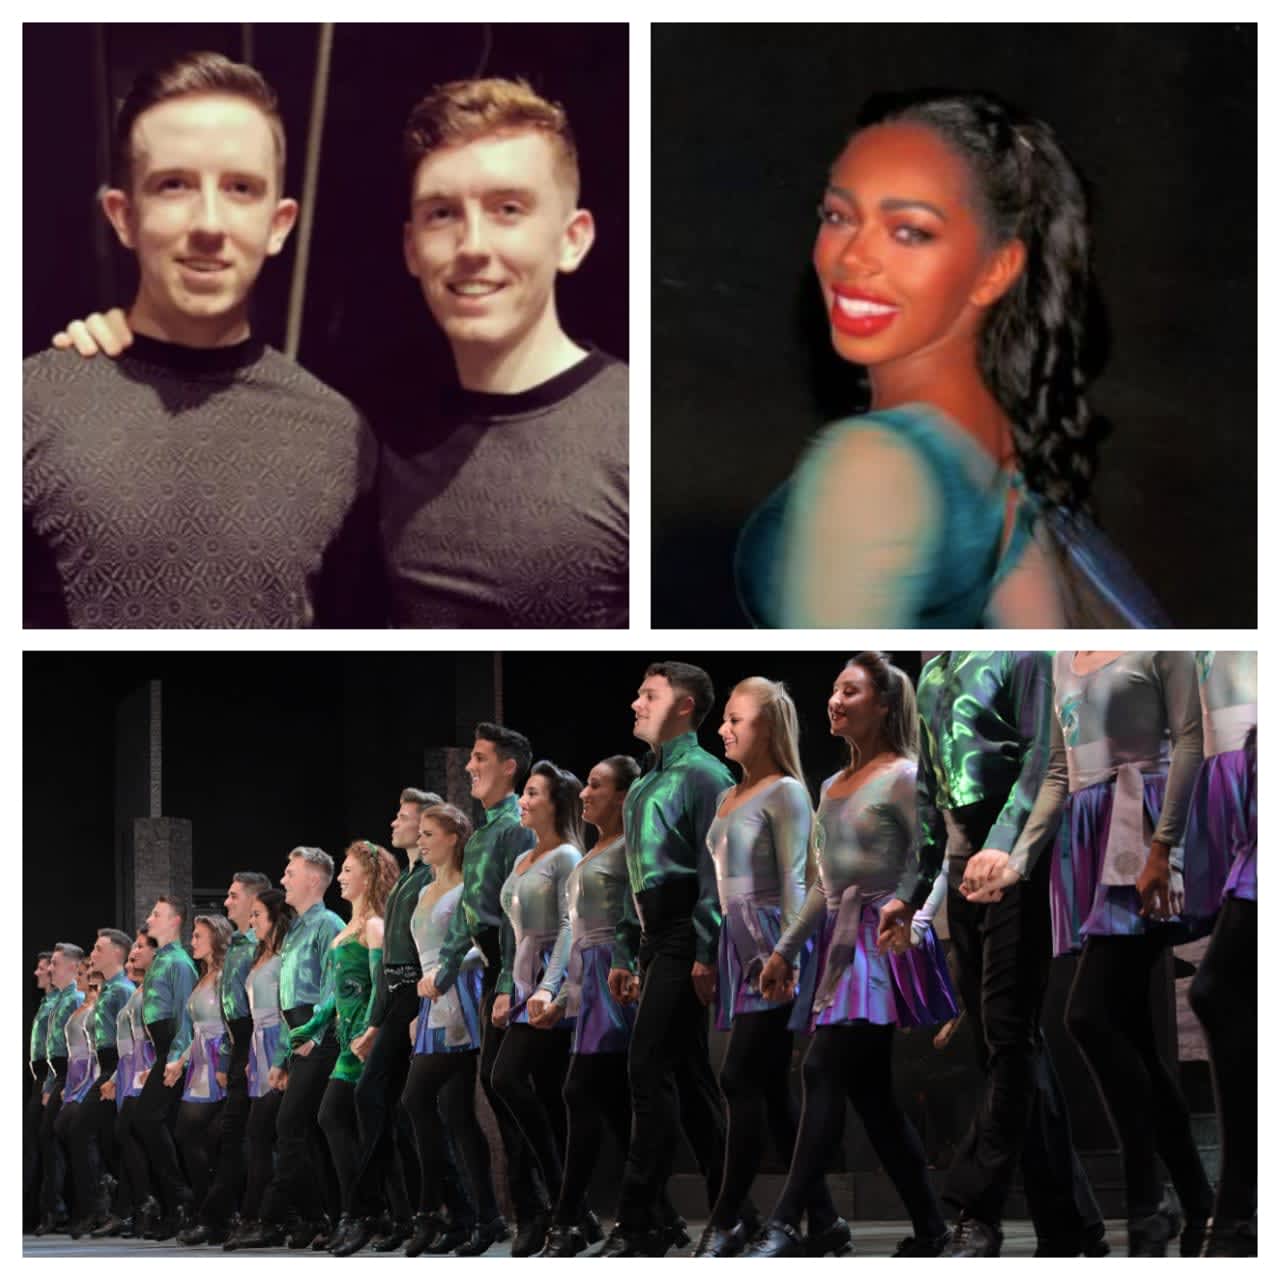 TikTok sensations the Gardiner Brothers and Morgan Bullock are featured in the cast of Riverdance.